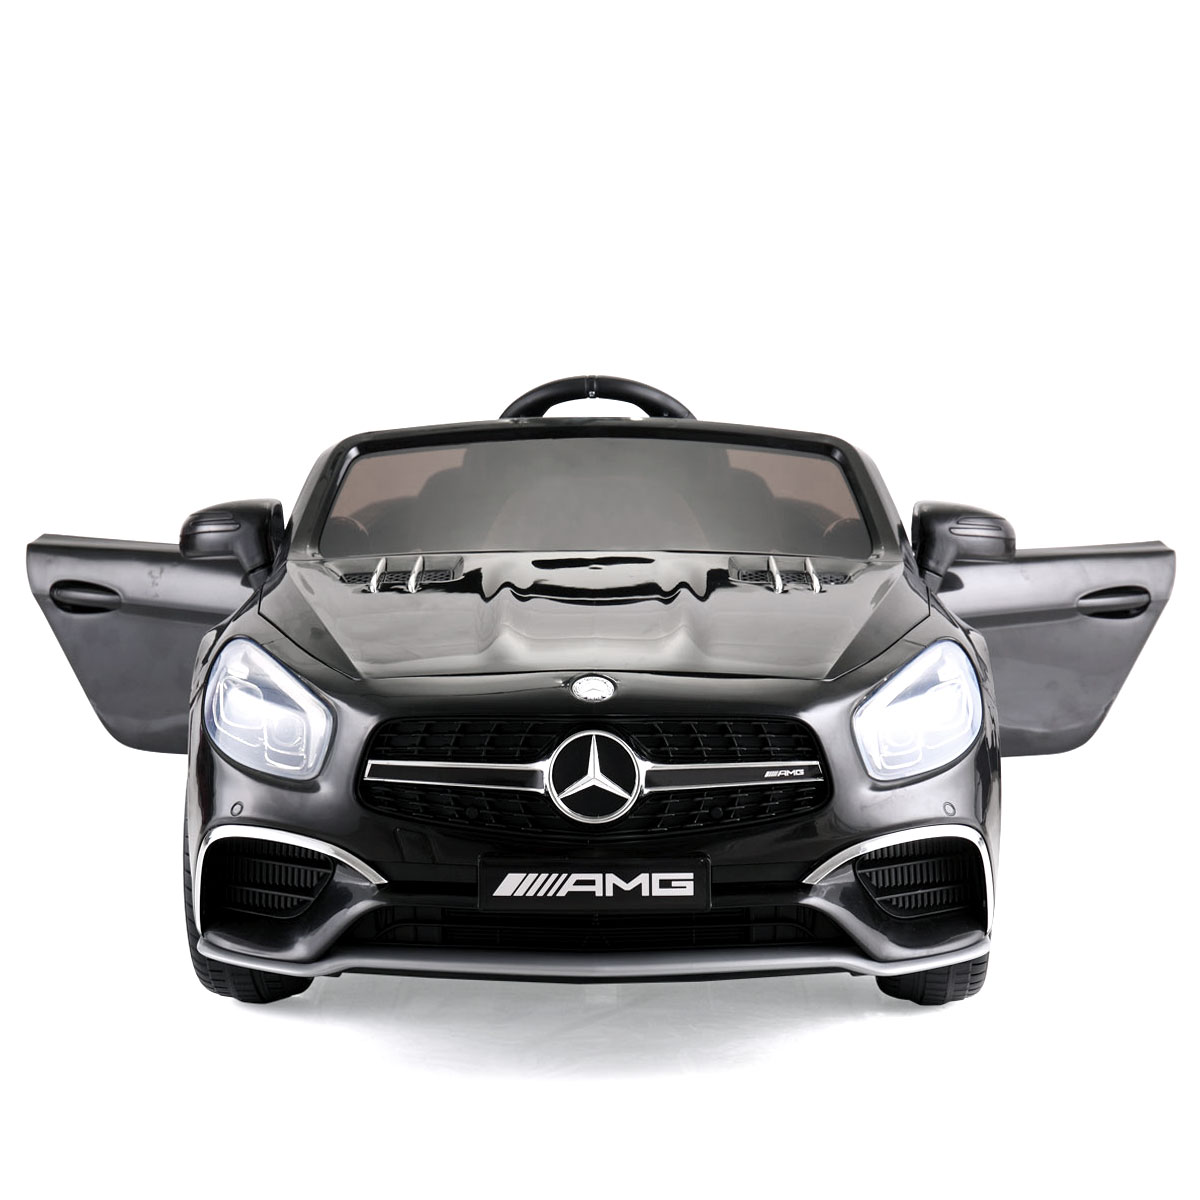 12V Mercedes-Benz Licensed Electric Kids Ride on Car, Battery Powered Vehicle with LED Lights, Music, USB, MP3, Spring-Suspension RC 4-Wheeler,Black/Red-CASAINC